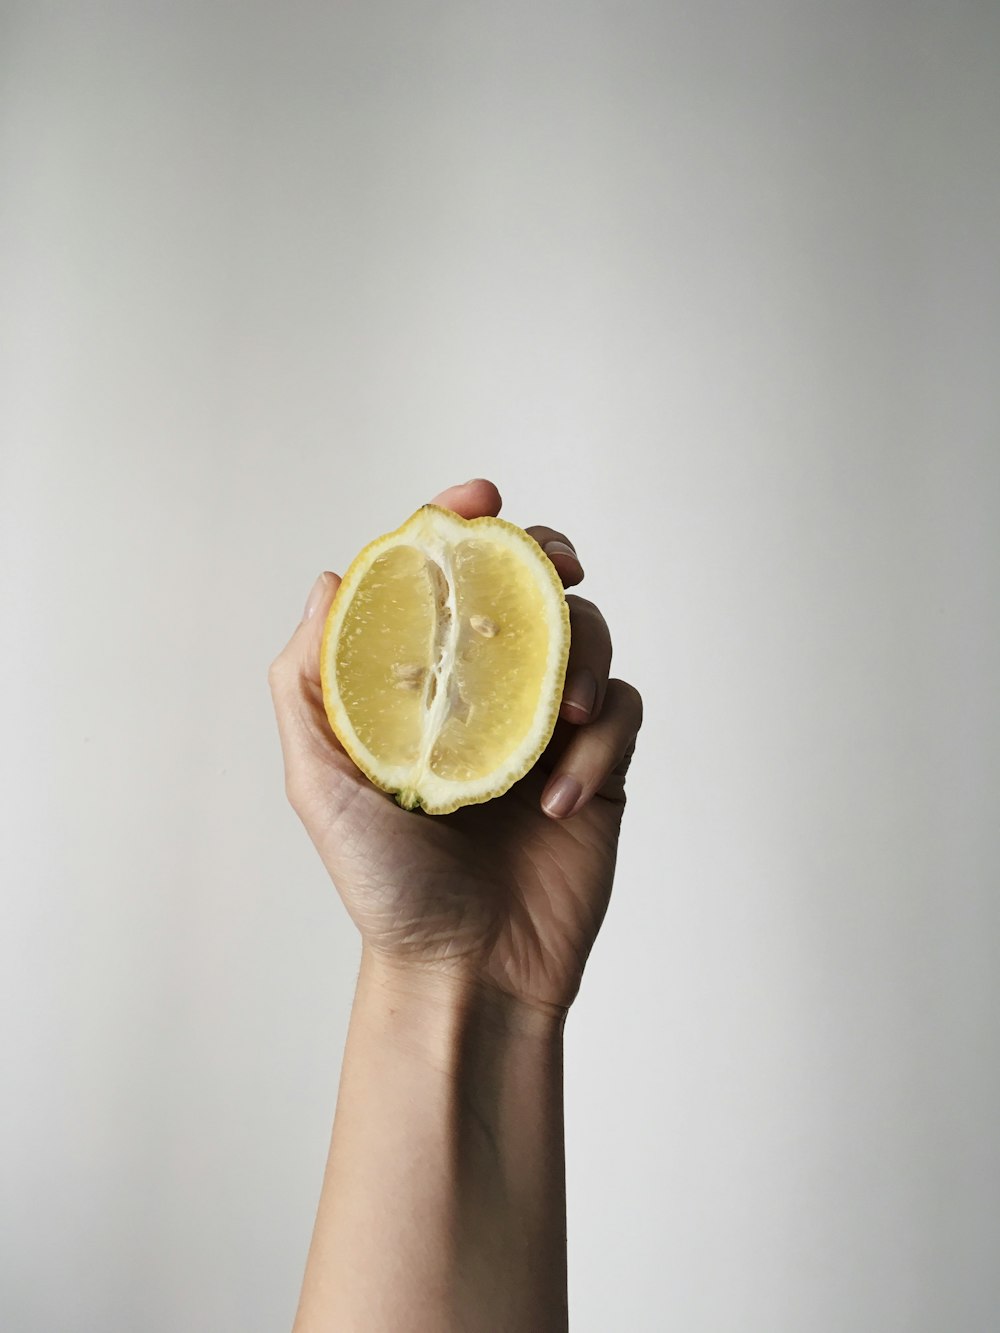 a person holding a half of a lemon in their hand